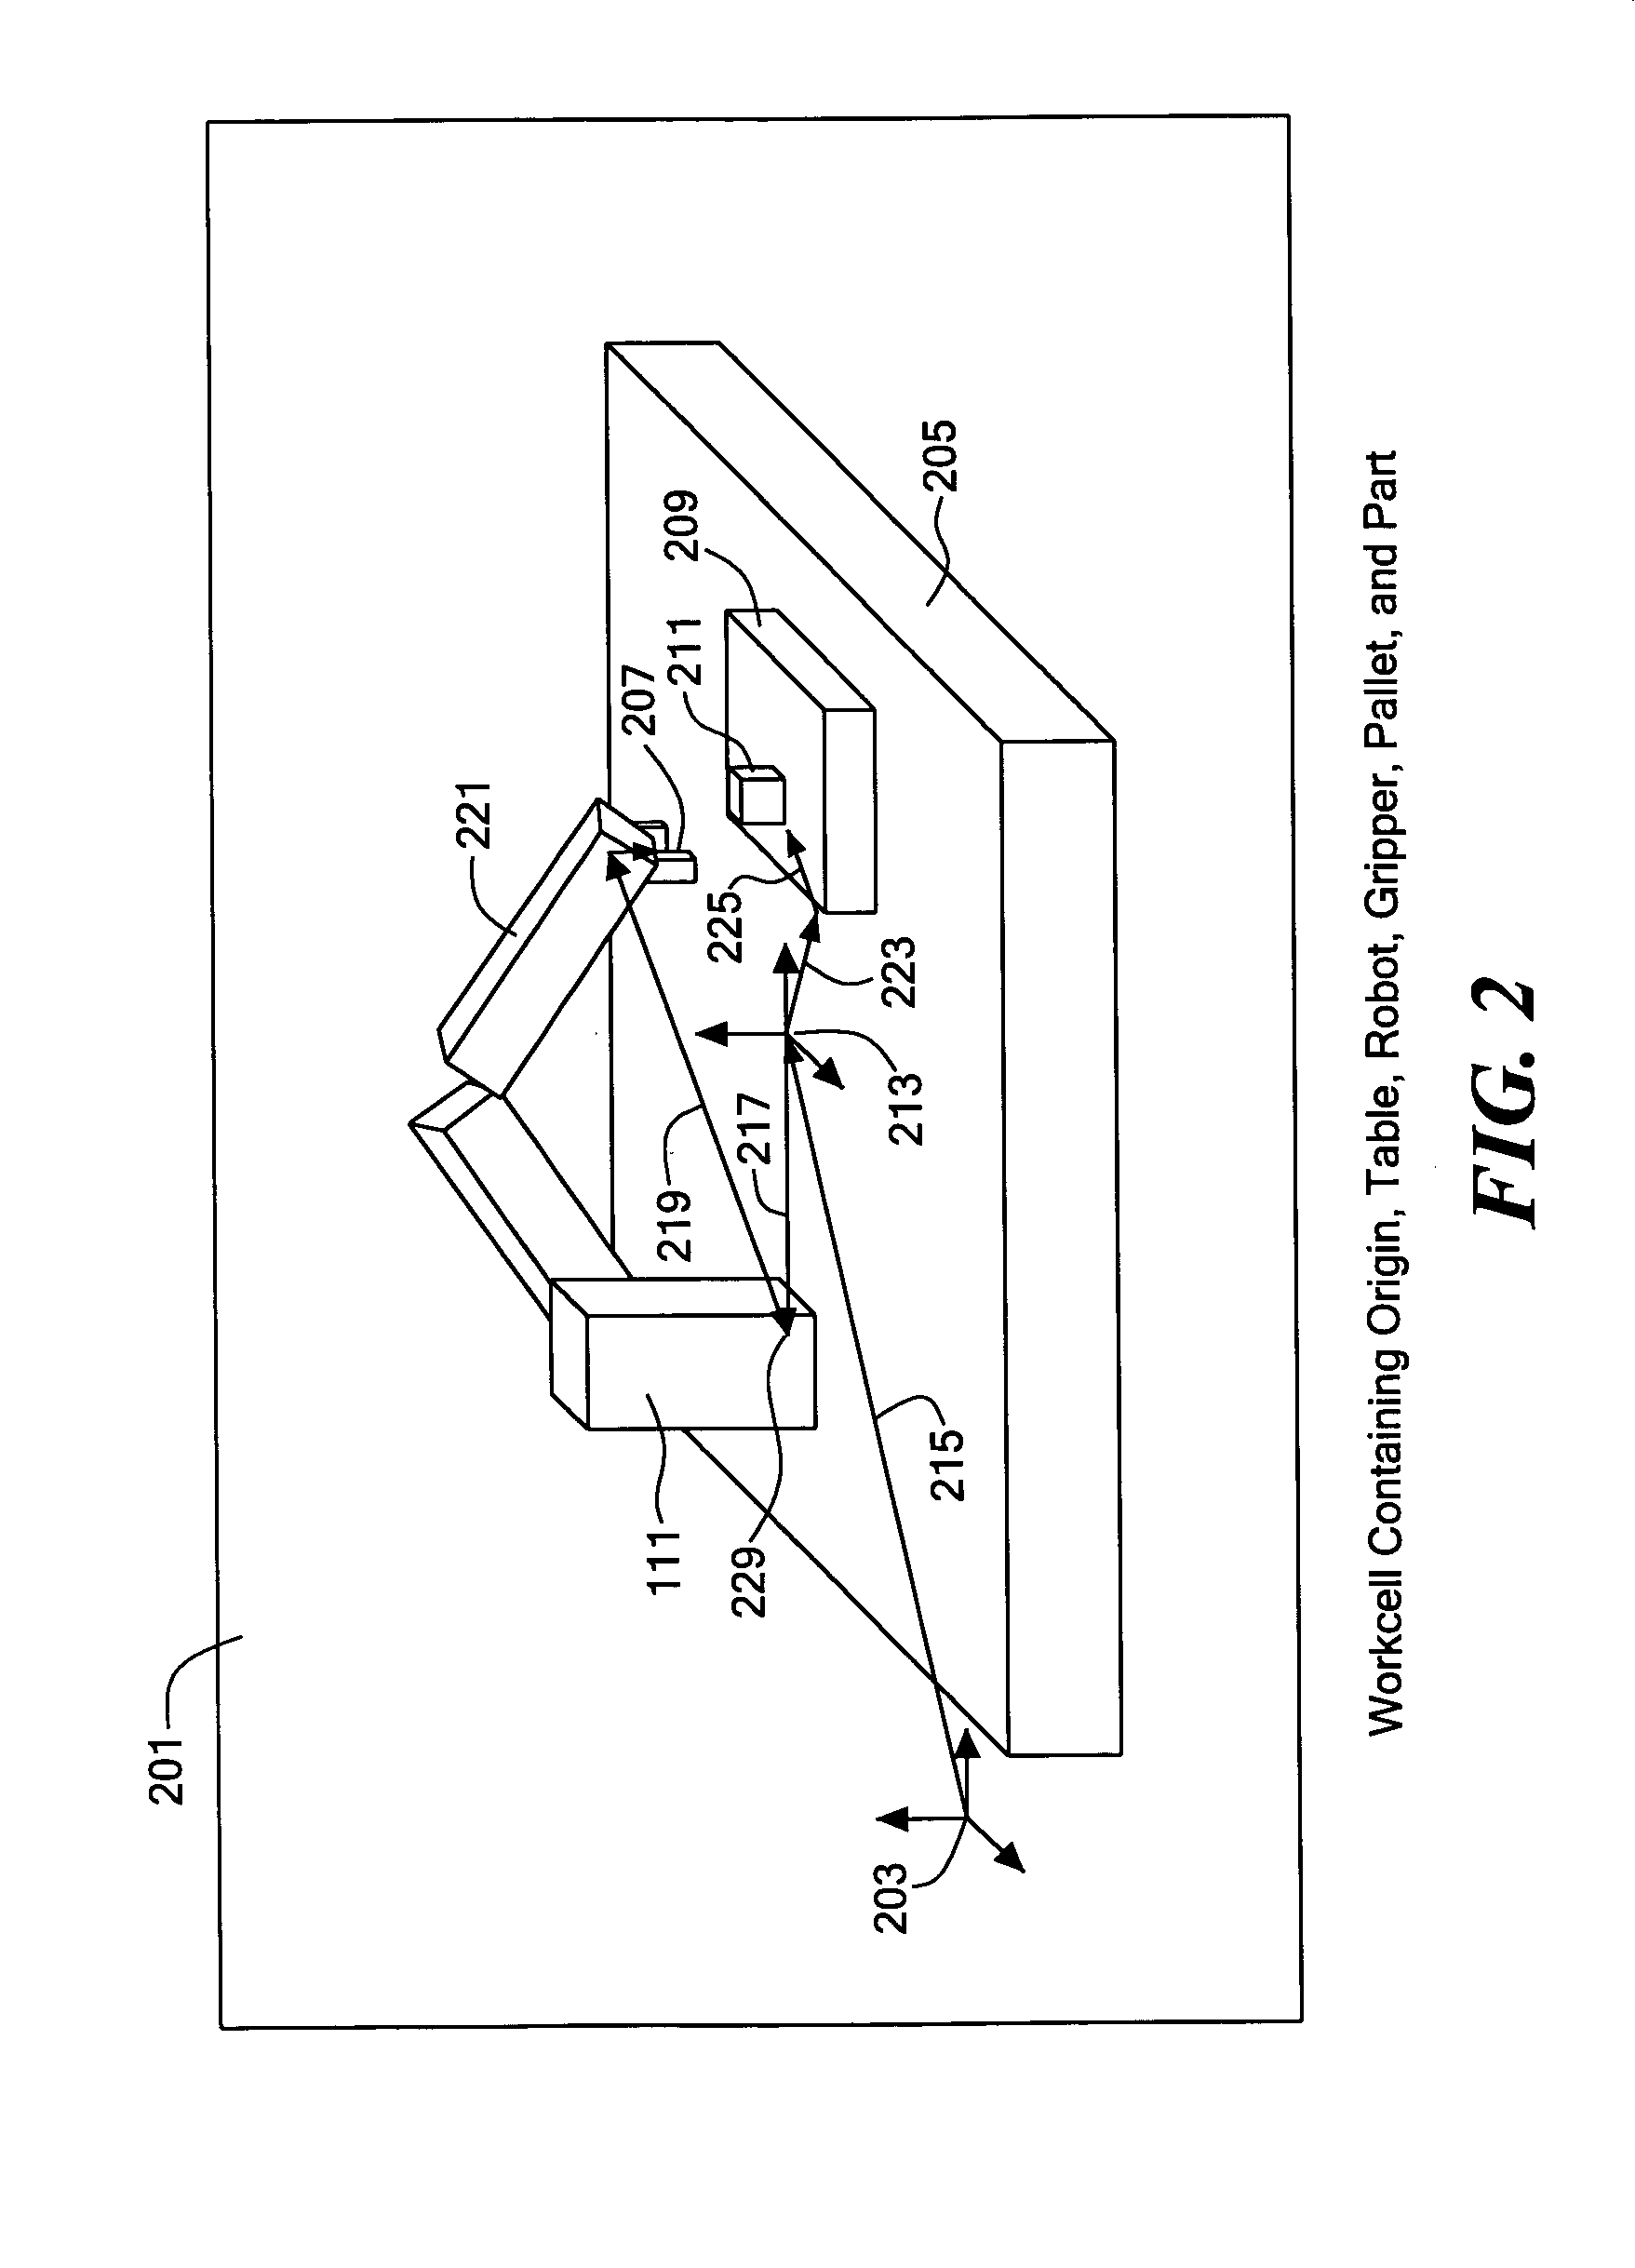 System and method for control and simulation